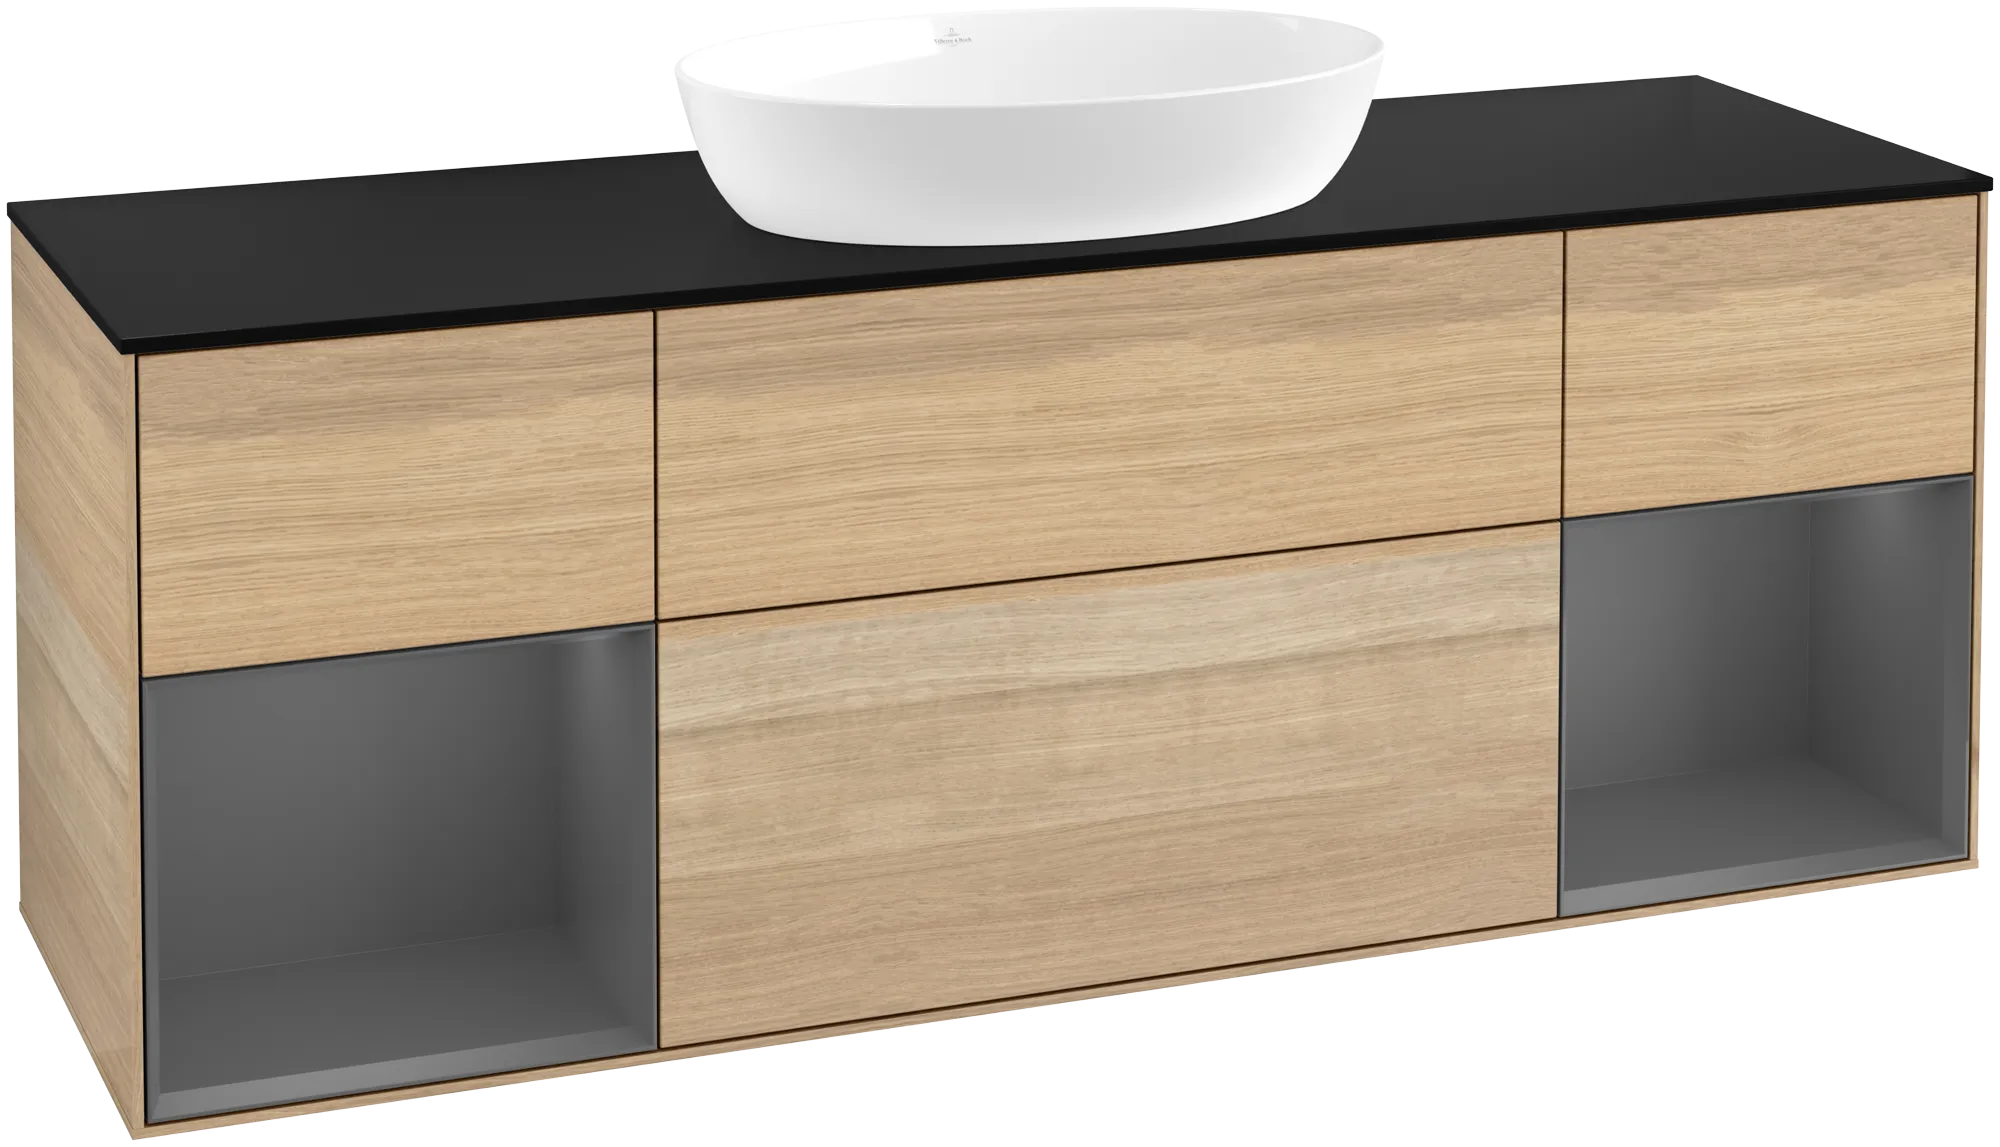 Picture of VILLEROY BOCH Finion Vanity unit, with lighting, 4 pull-out compartments, 1600 x 603 x 501 mm, Oak Veneer / Anthracite Matt Lacquer / Glass Black Matt #GD02GKPC